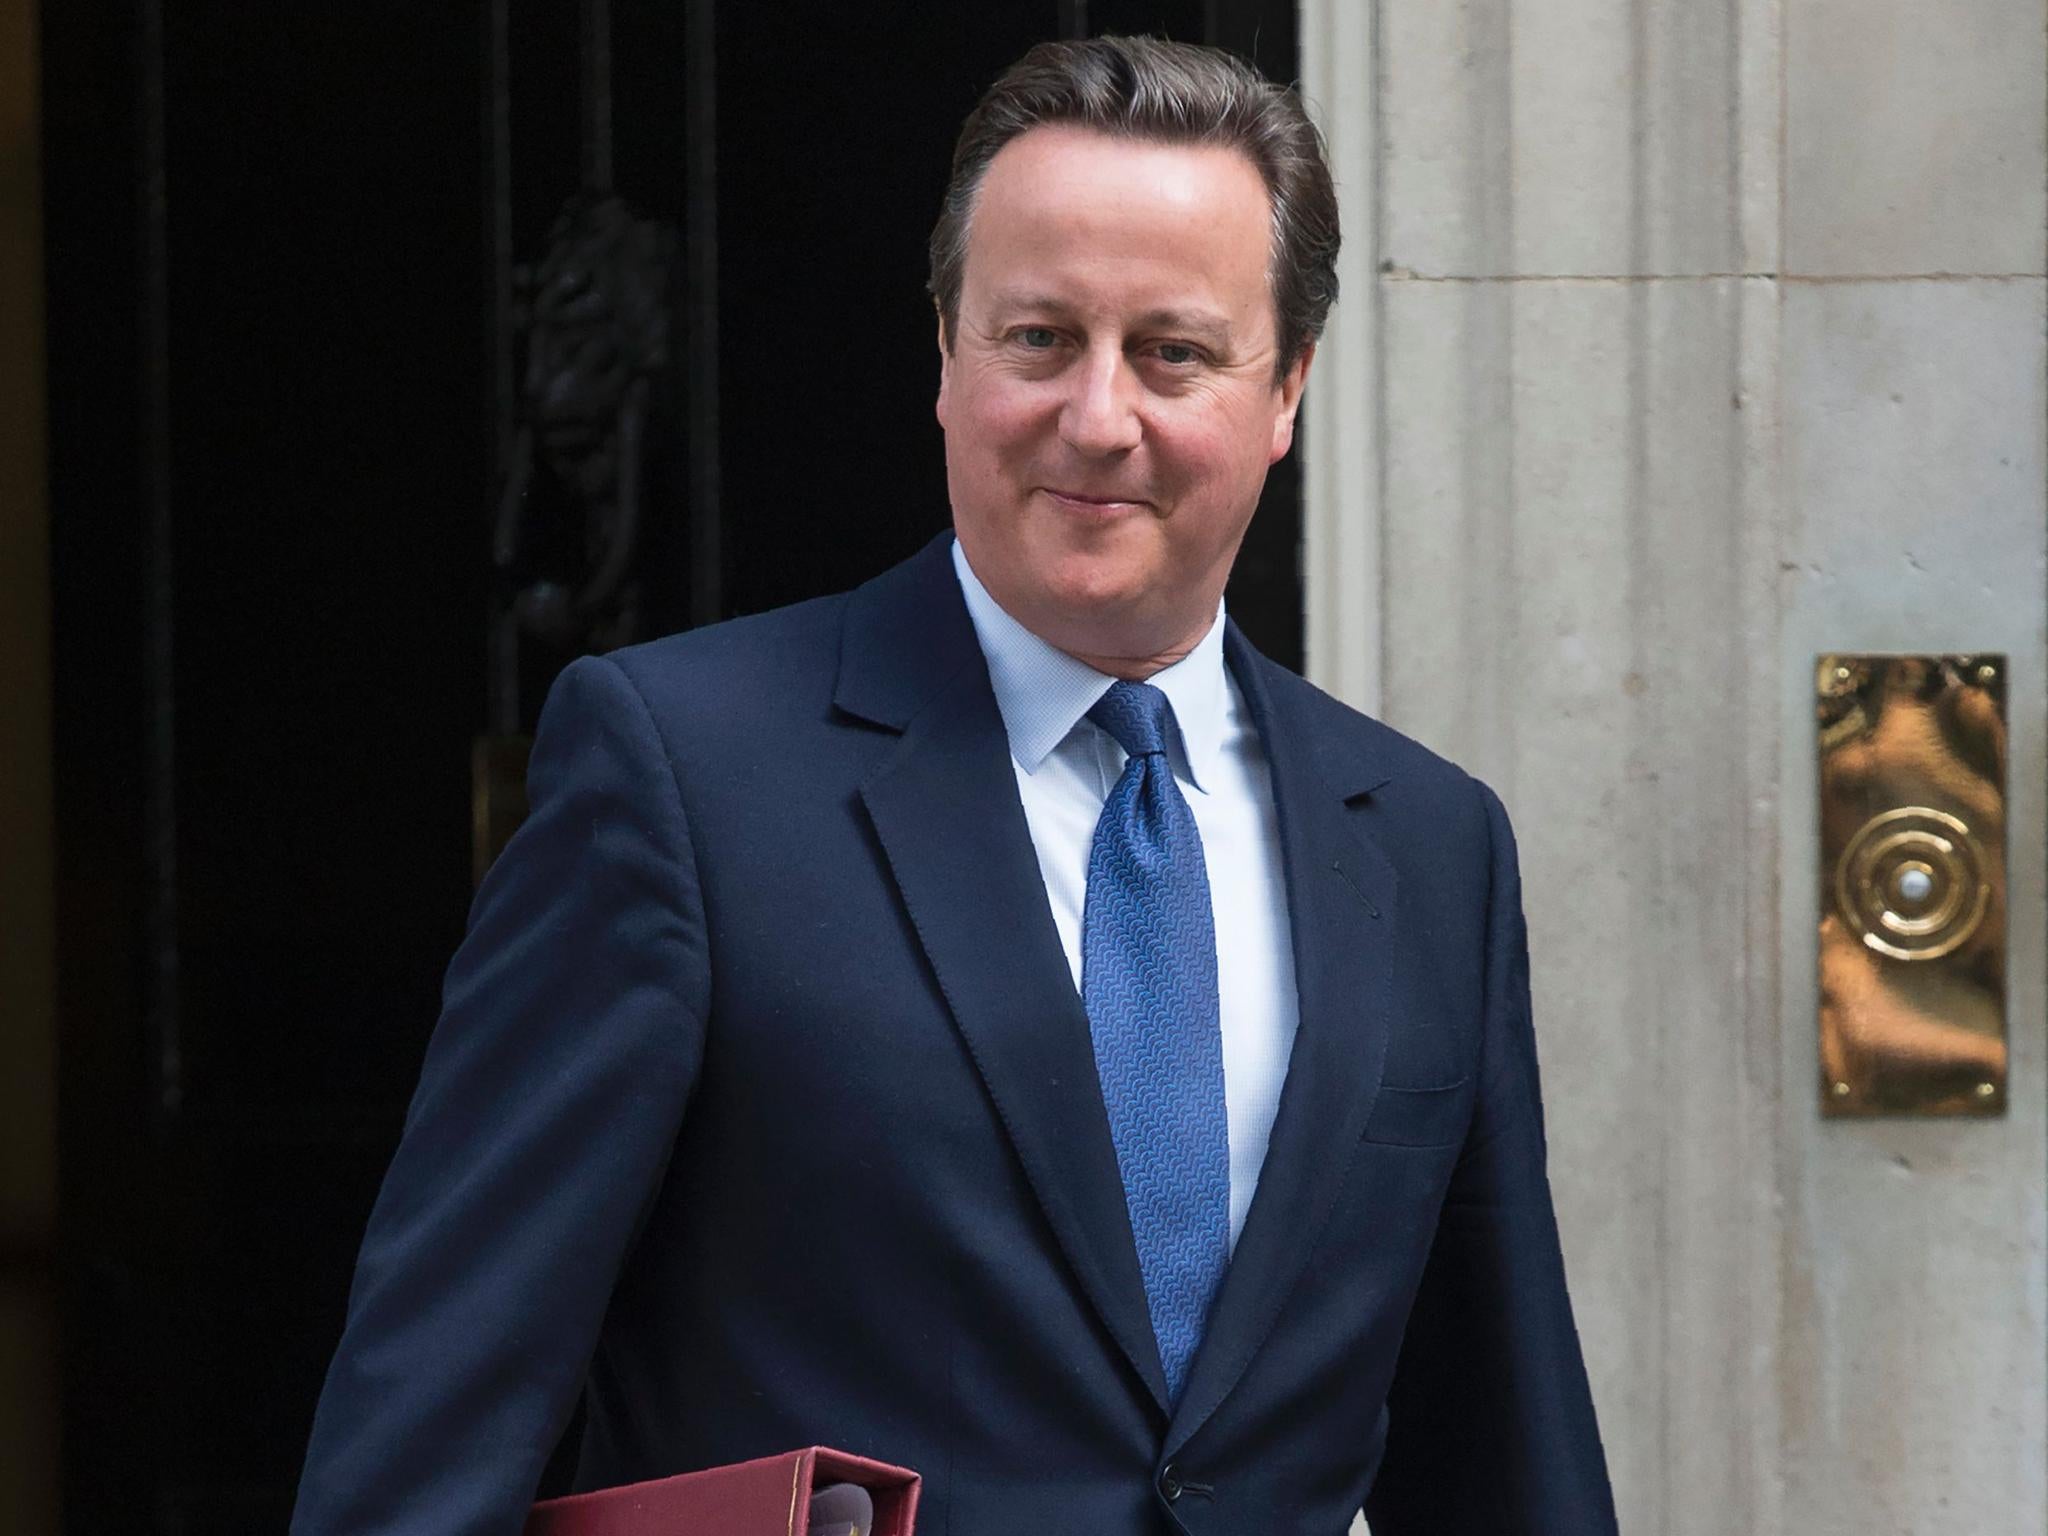 Mr Cameron was instrumental in increasing economic ties with Beijing while in power